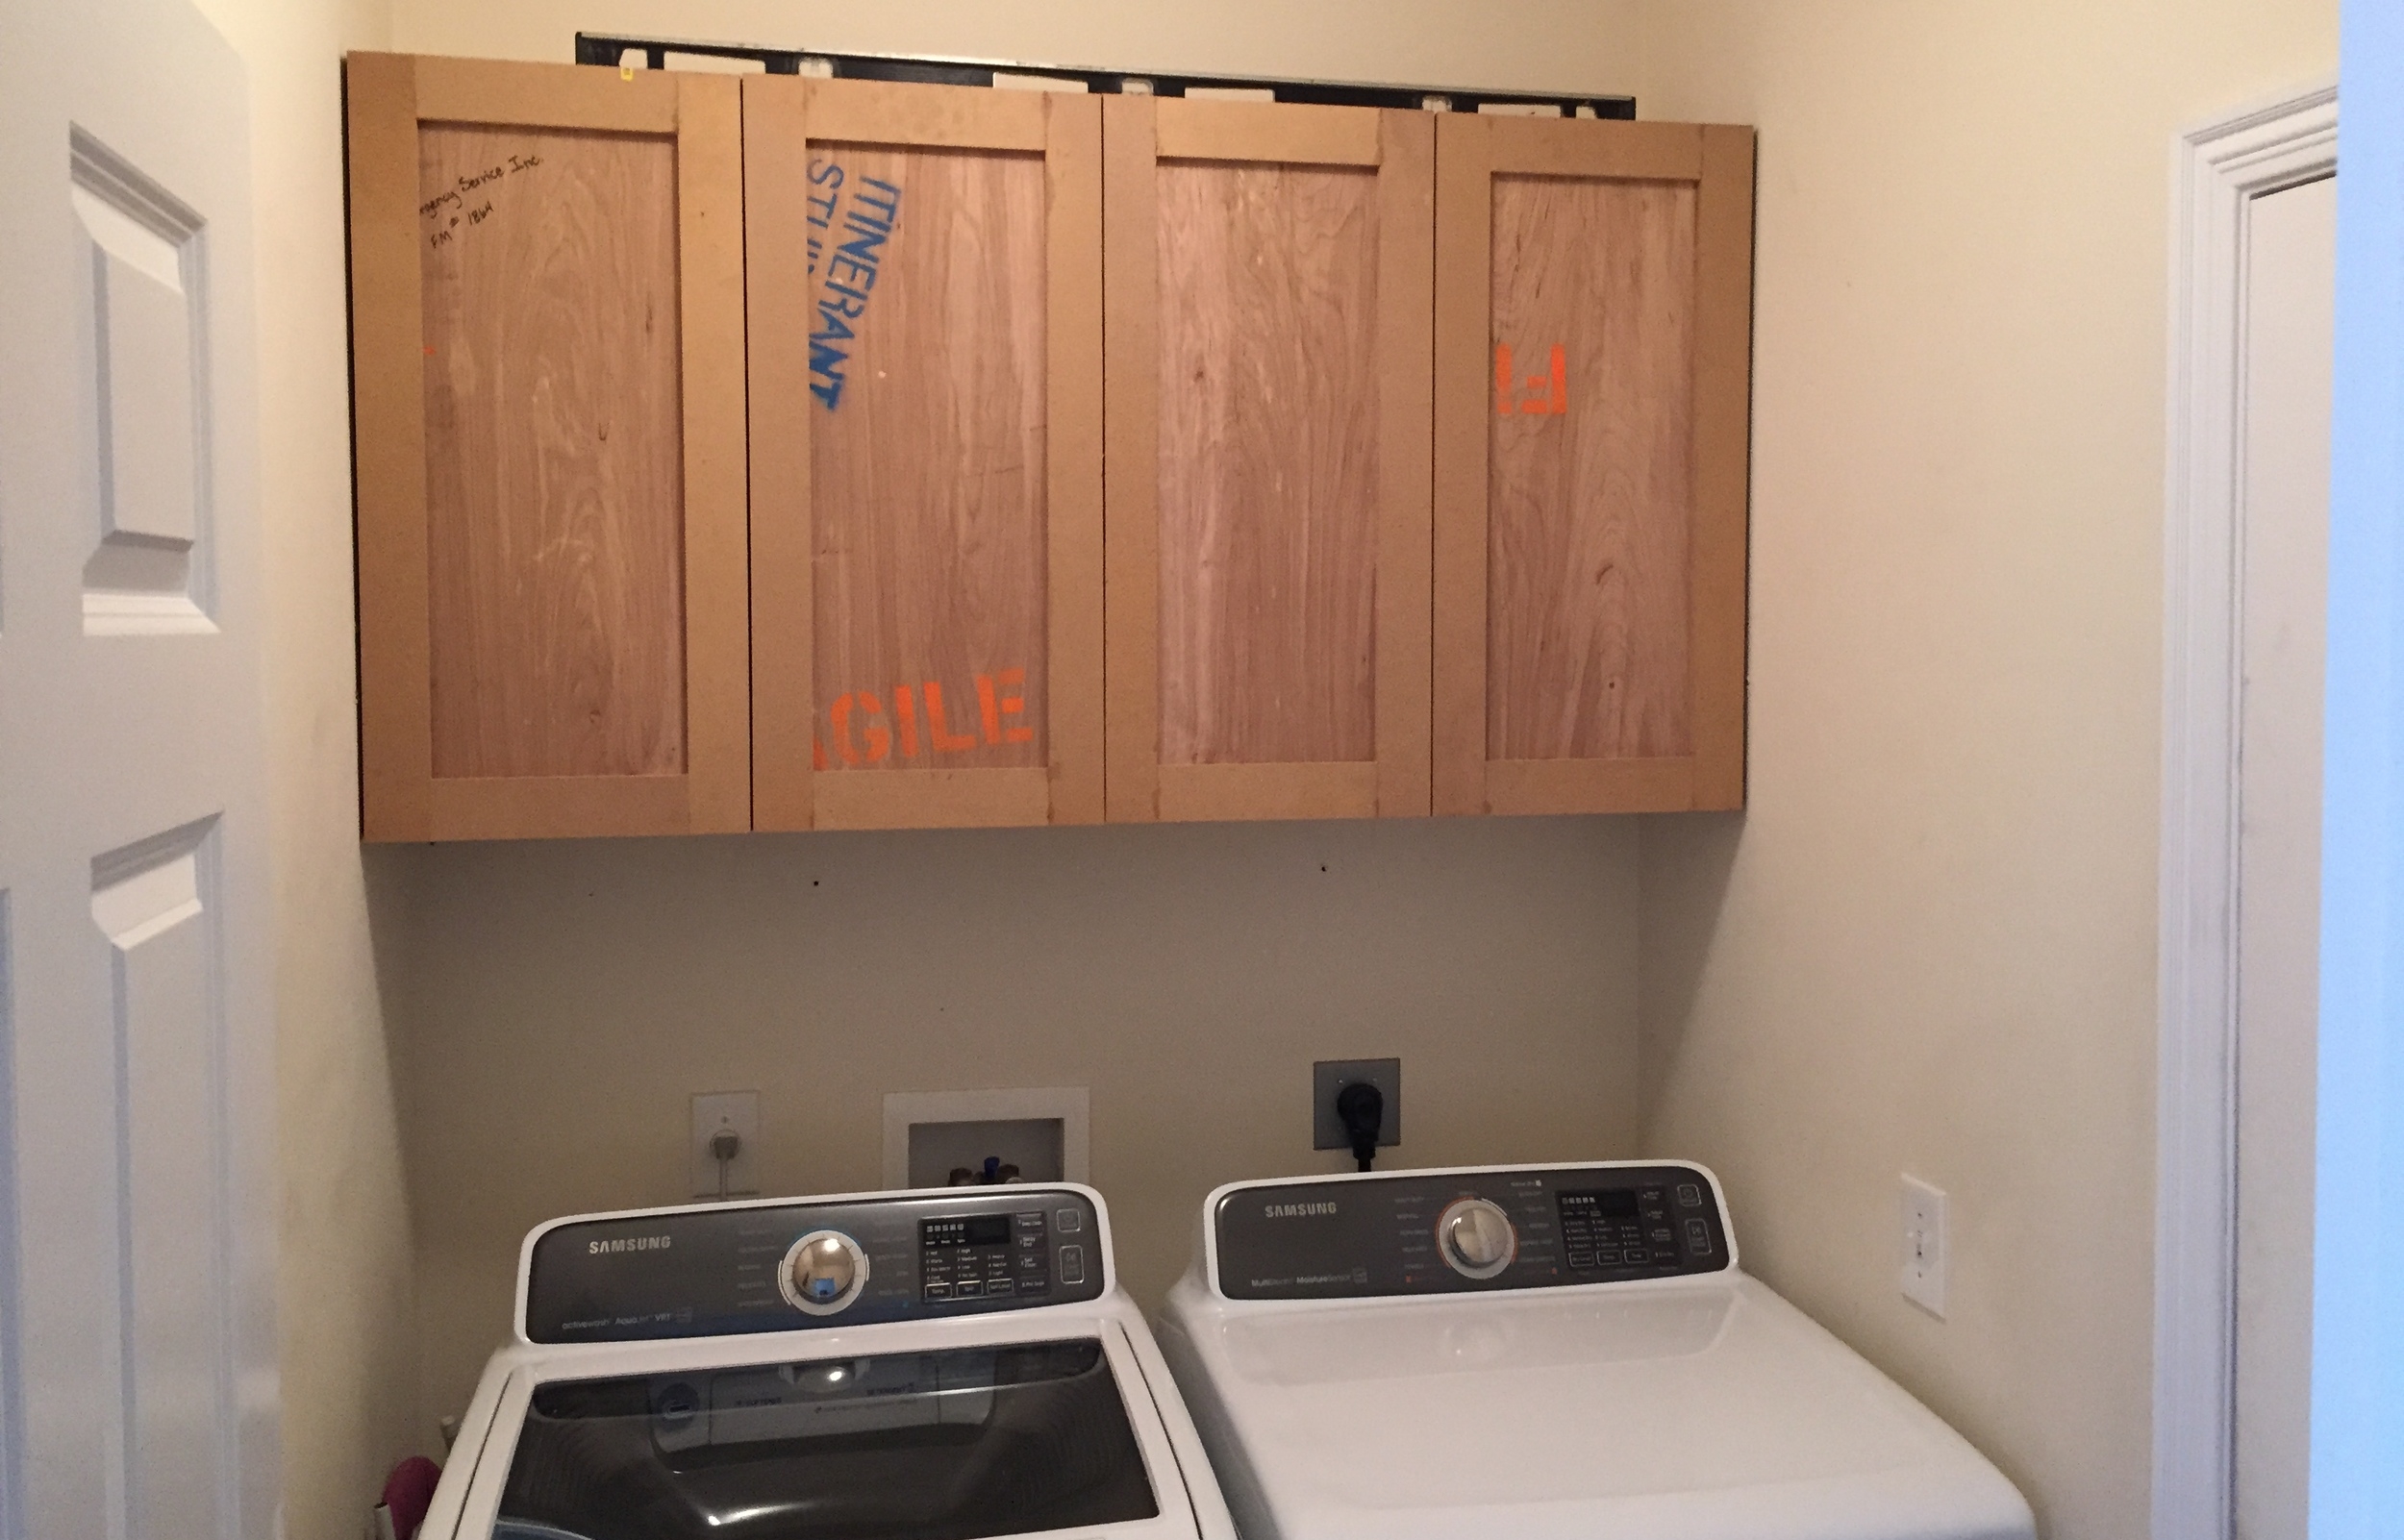 Upper Cabinets Laundry Room Makeover, How To Replace Laundry Room Cabinets